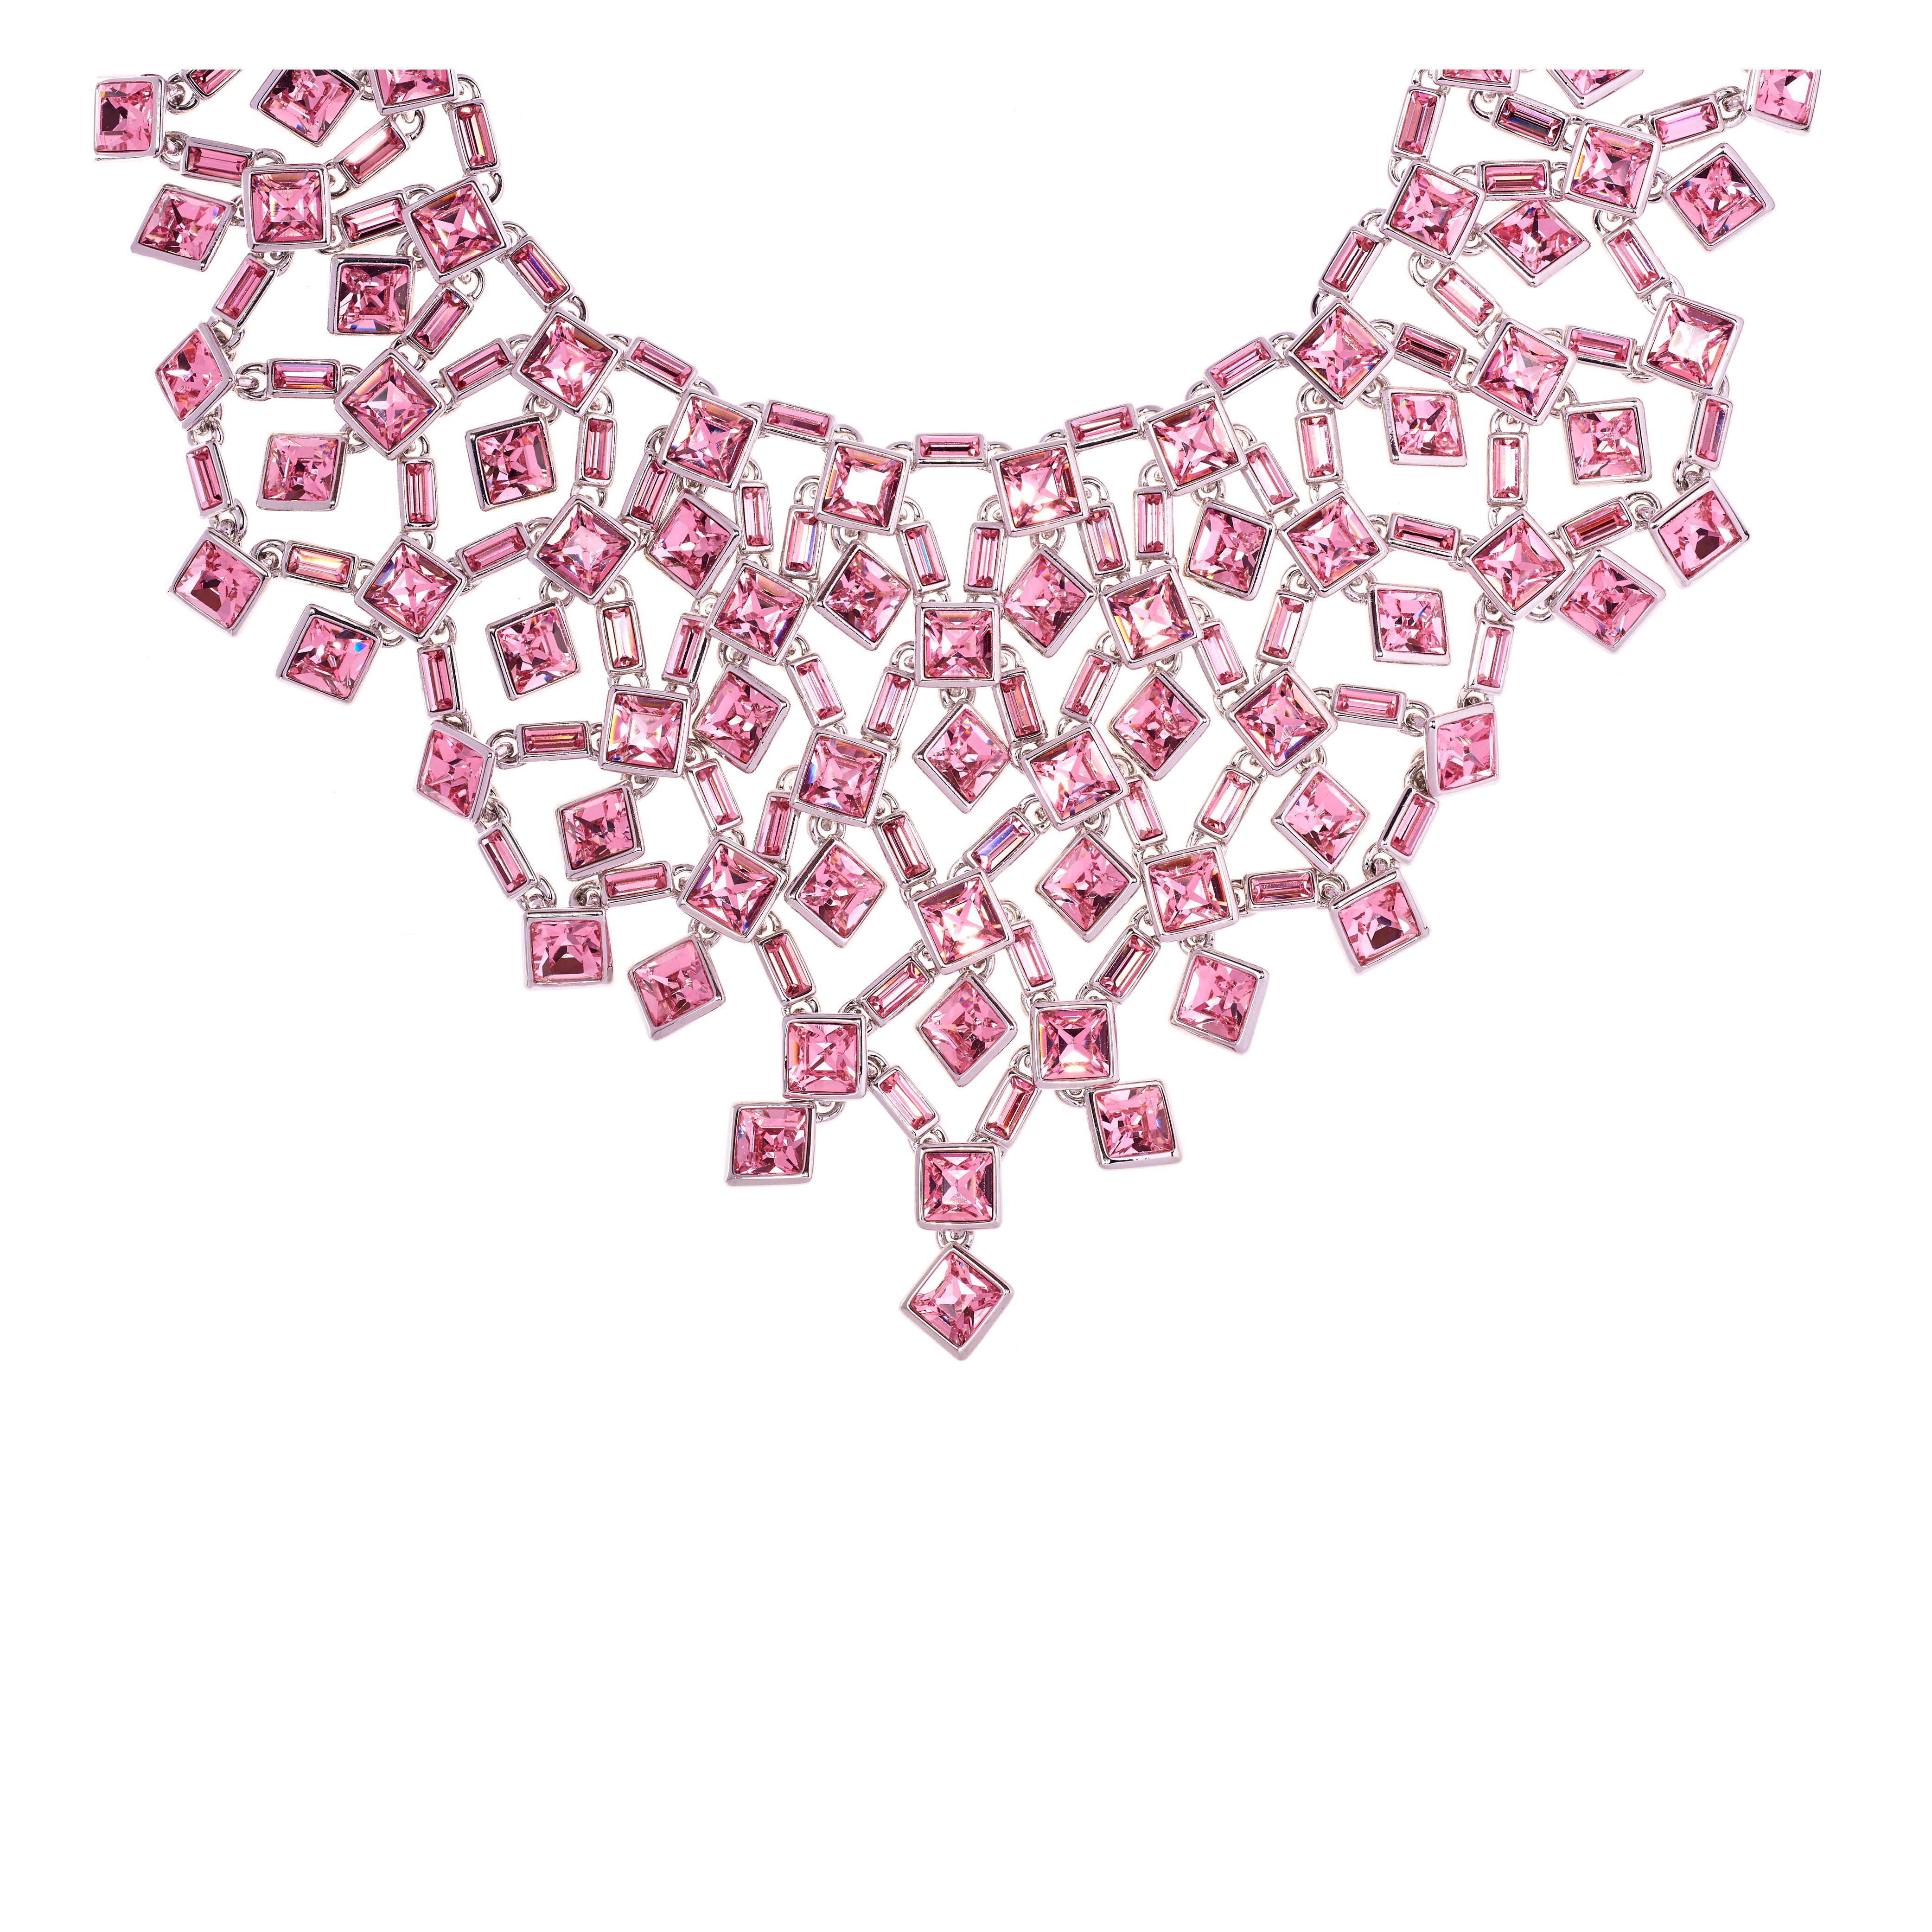 Simon Harrison Claudette Large Pink Crystal Necklace In New Condition For Sale In London, GB